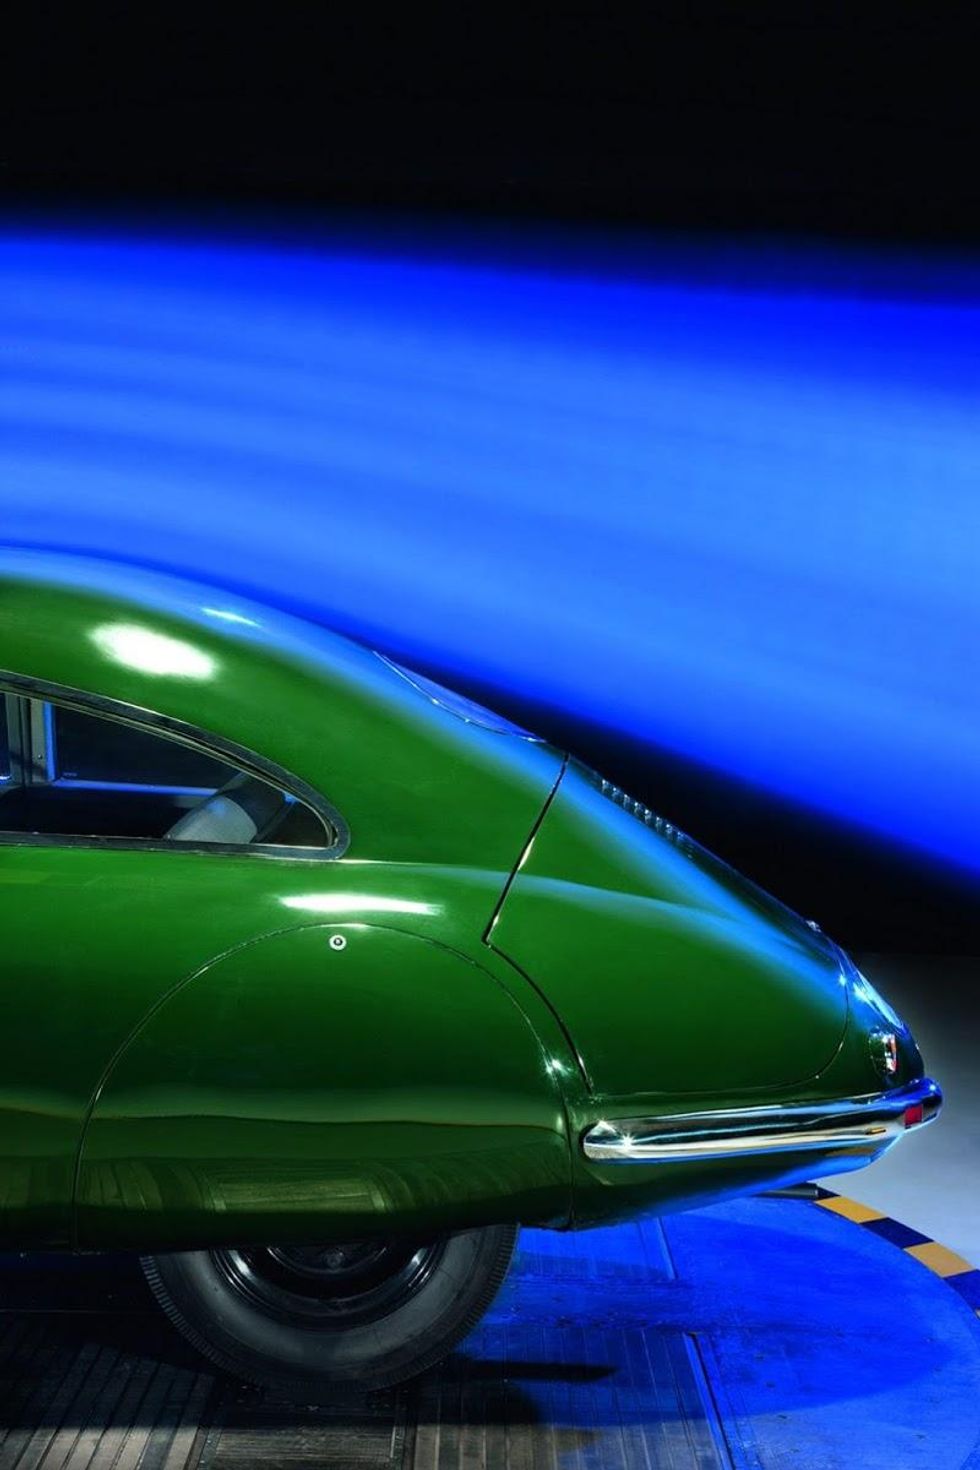 1947 Volkhart V2 in the wind tunnel